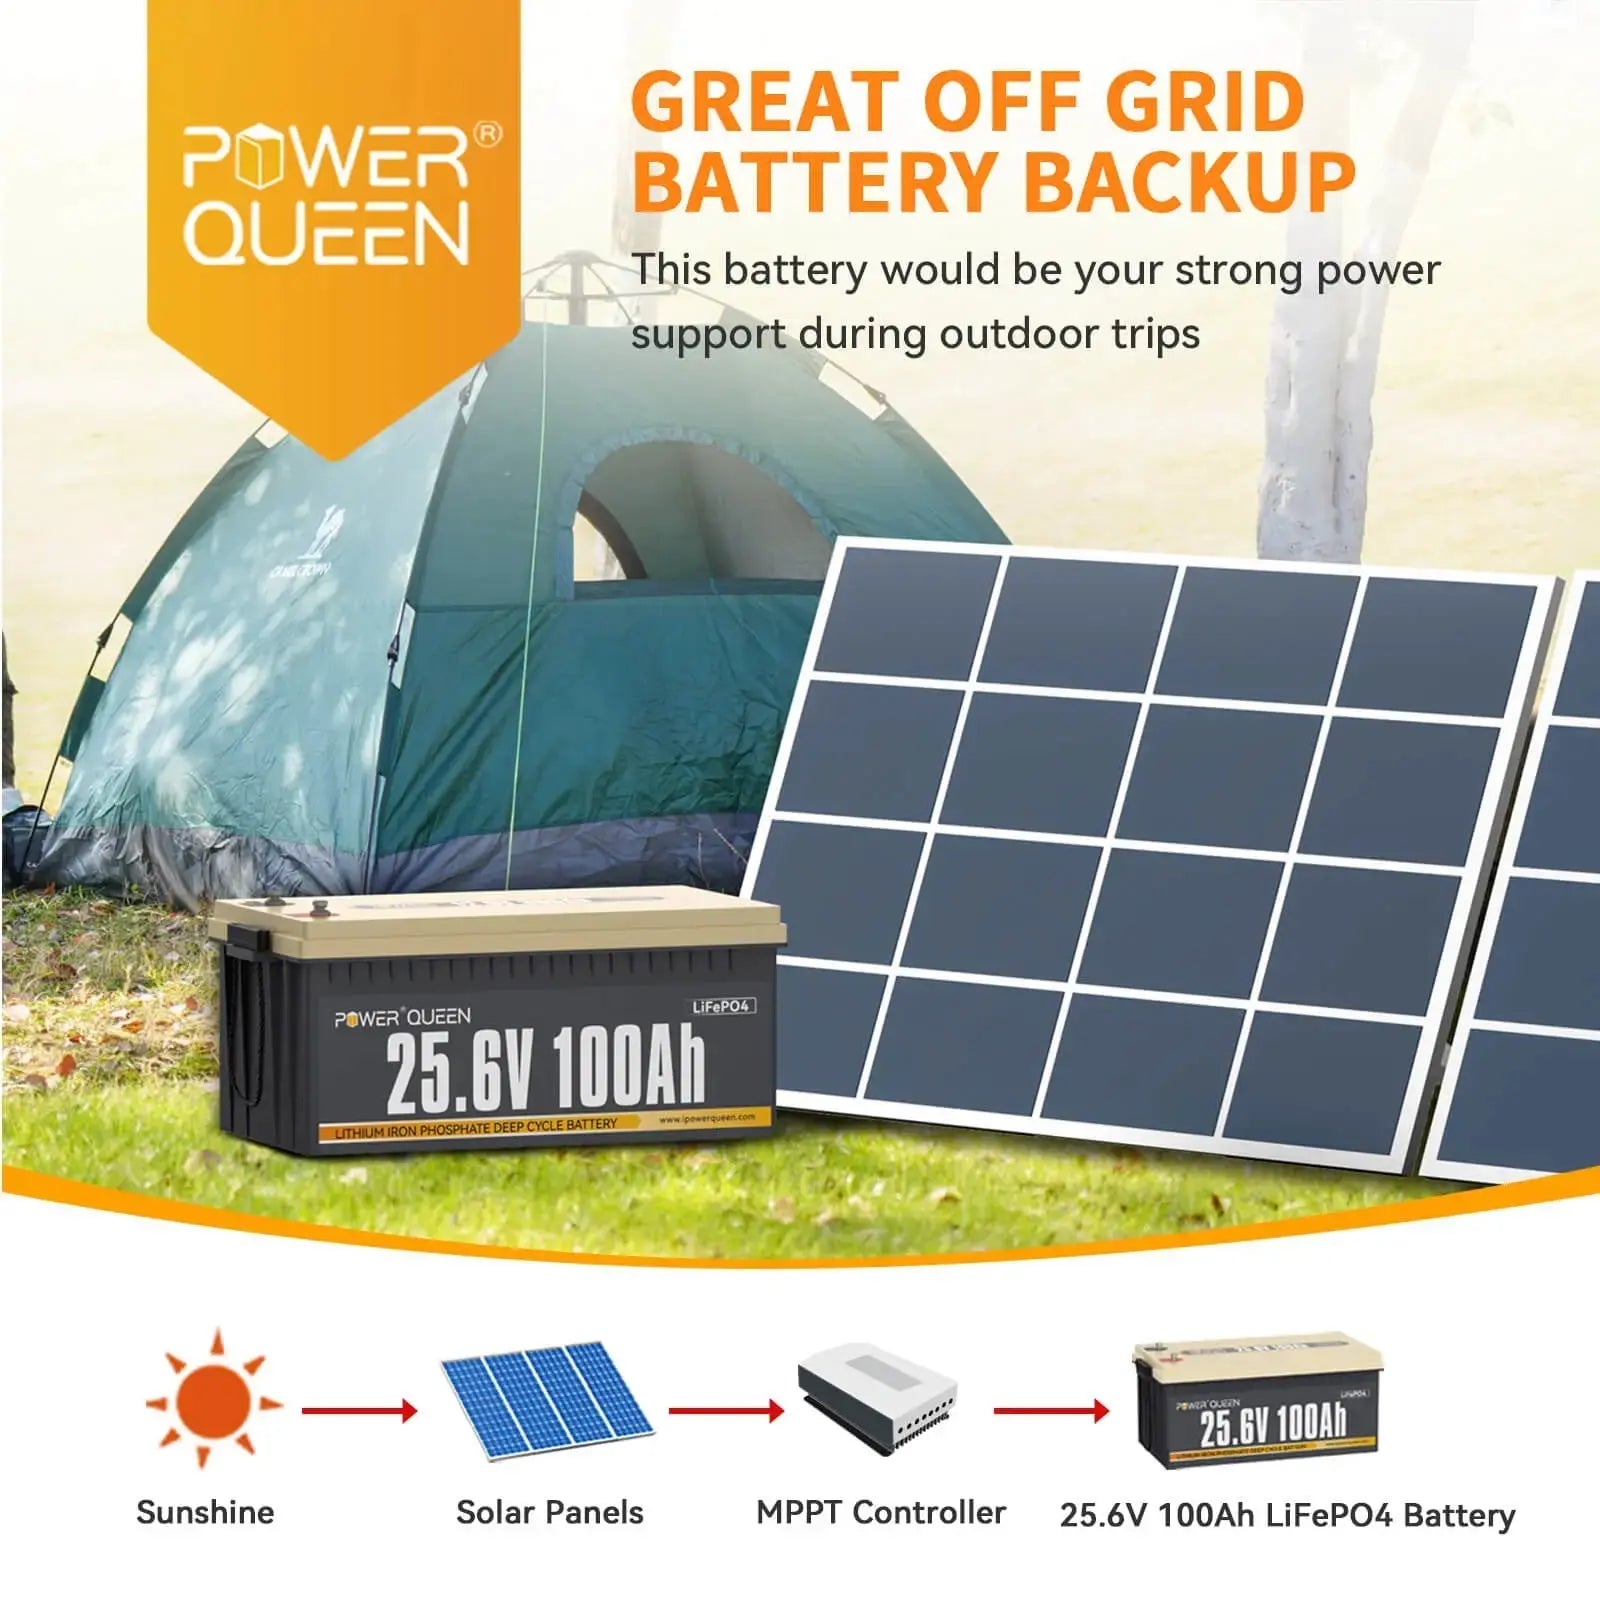 25.6V 100Ah LiFePO4 Battery  [Extra $20 OFF Code: OFF20] Power Queen